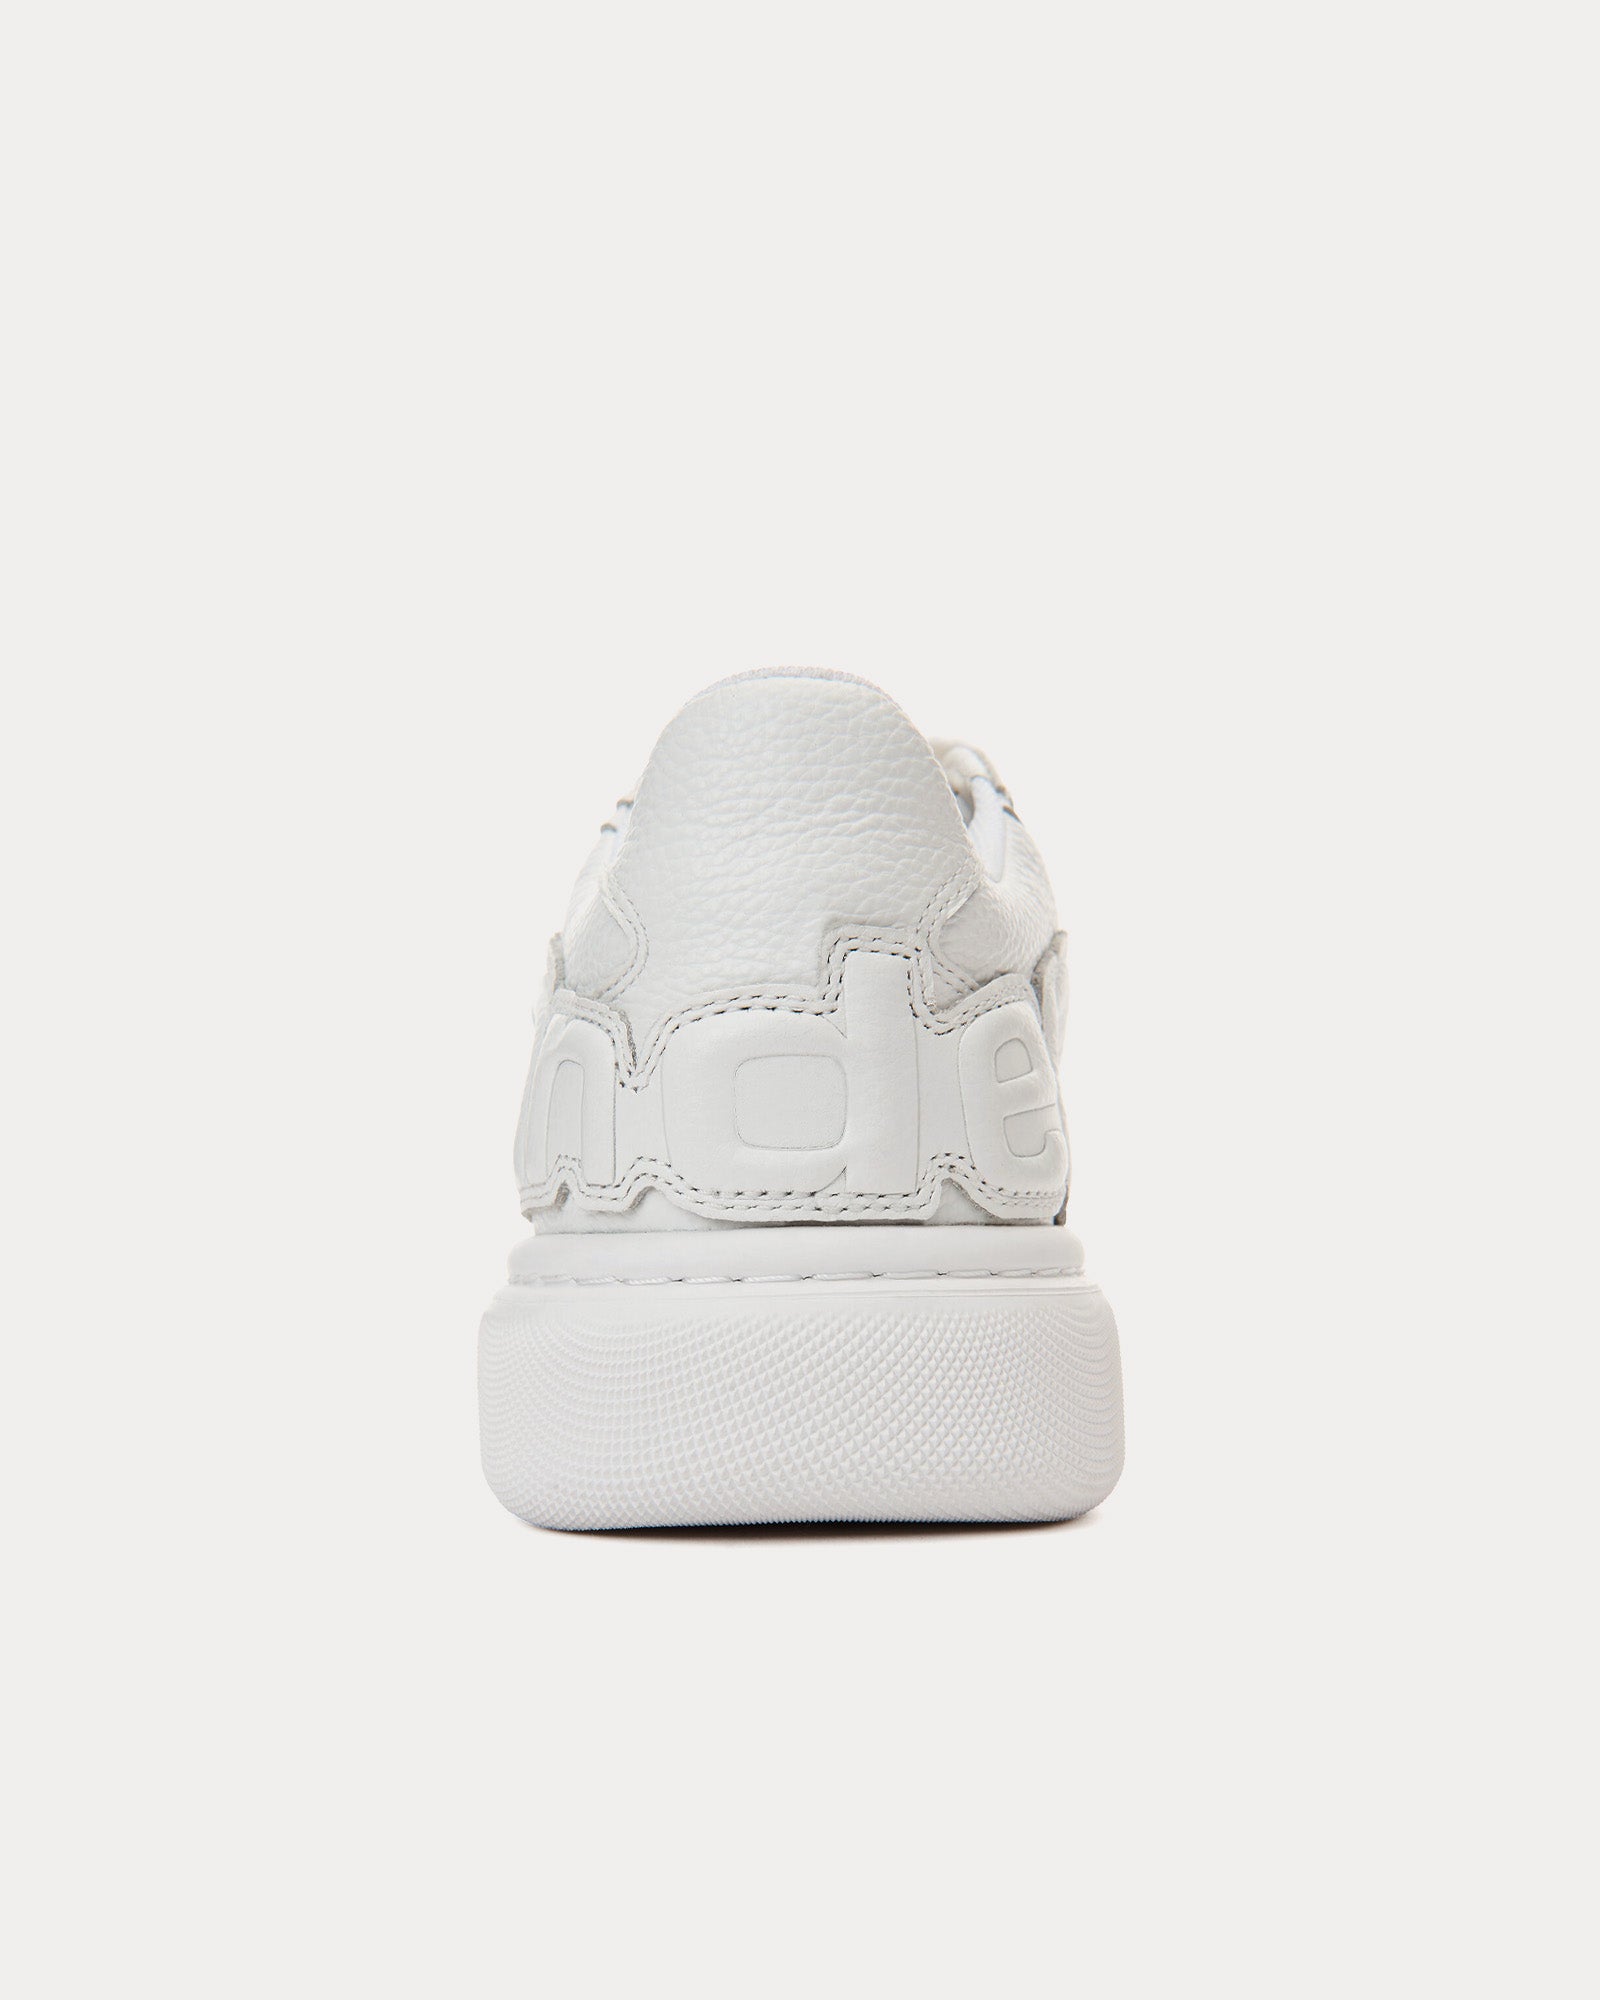 Alexander Wang - Puff Pebble Leather with Logo White Low Top Sneakers